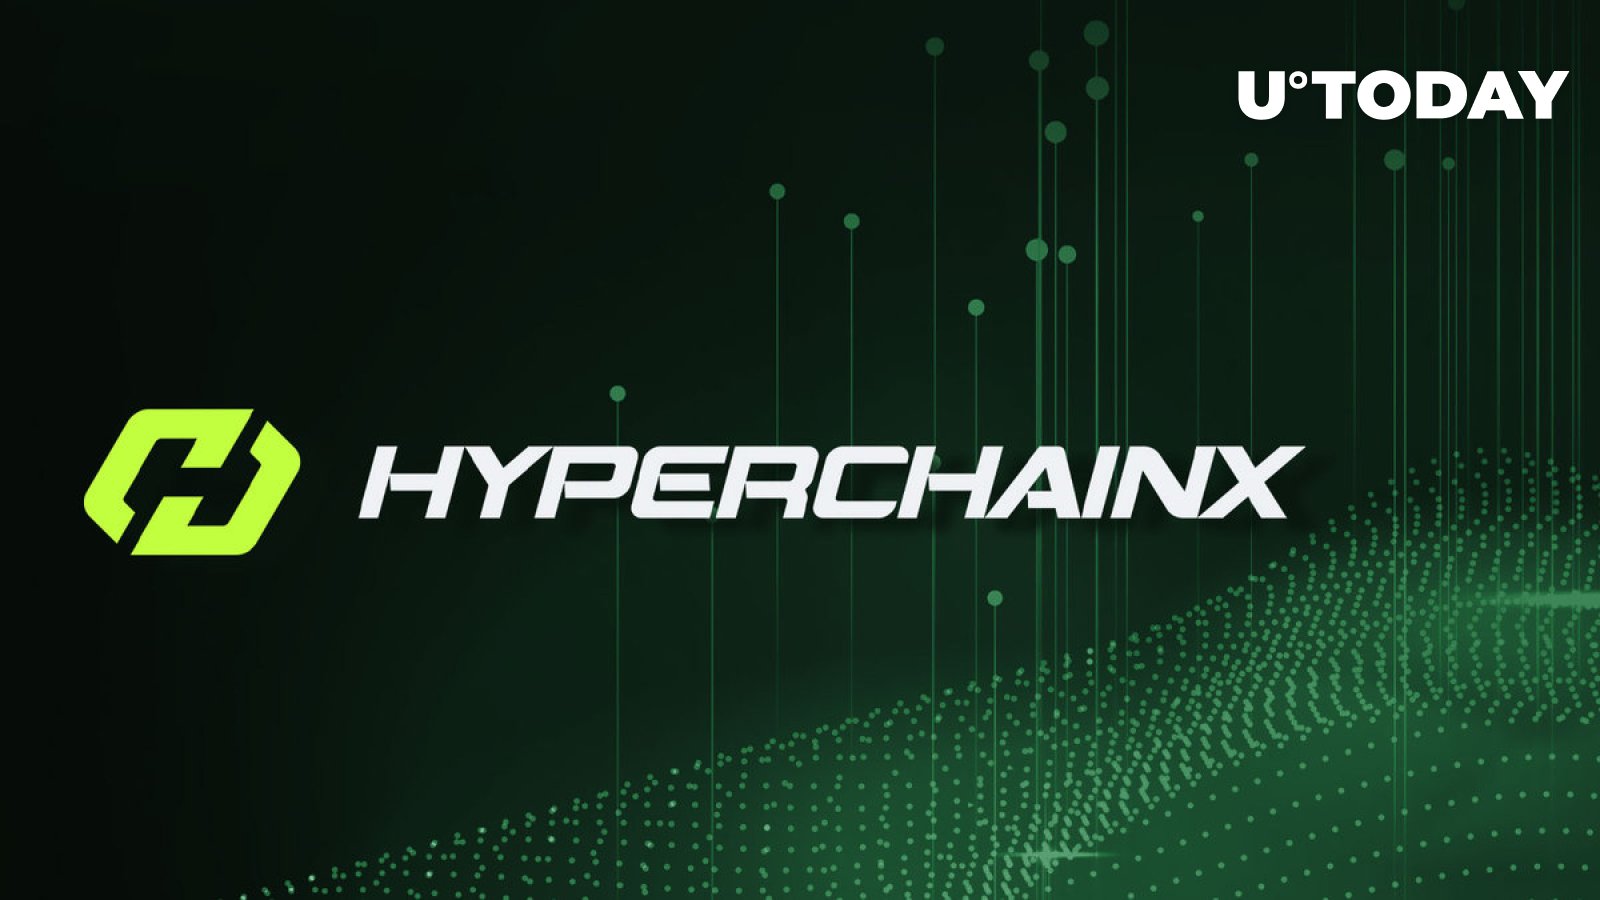 HyperChainX (HYPER) Soars 115%, Is there Driving Force Behind This Token?